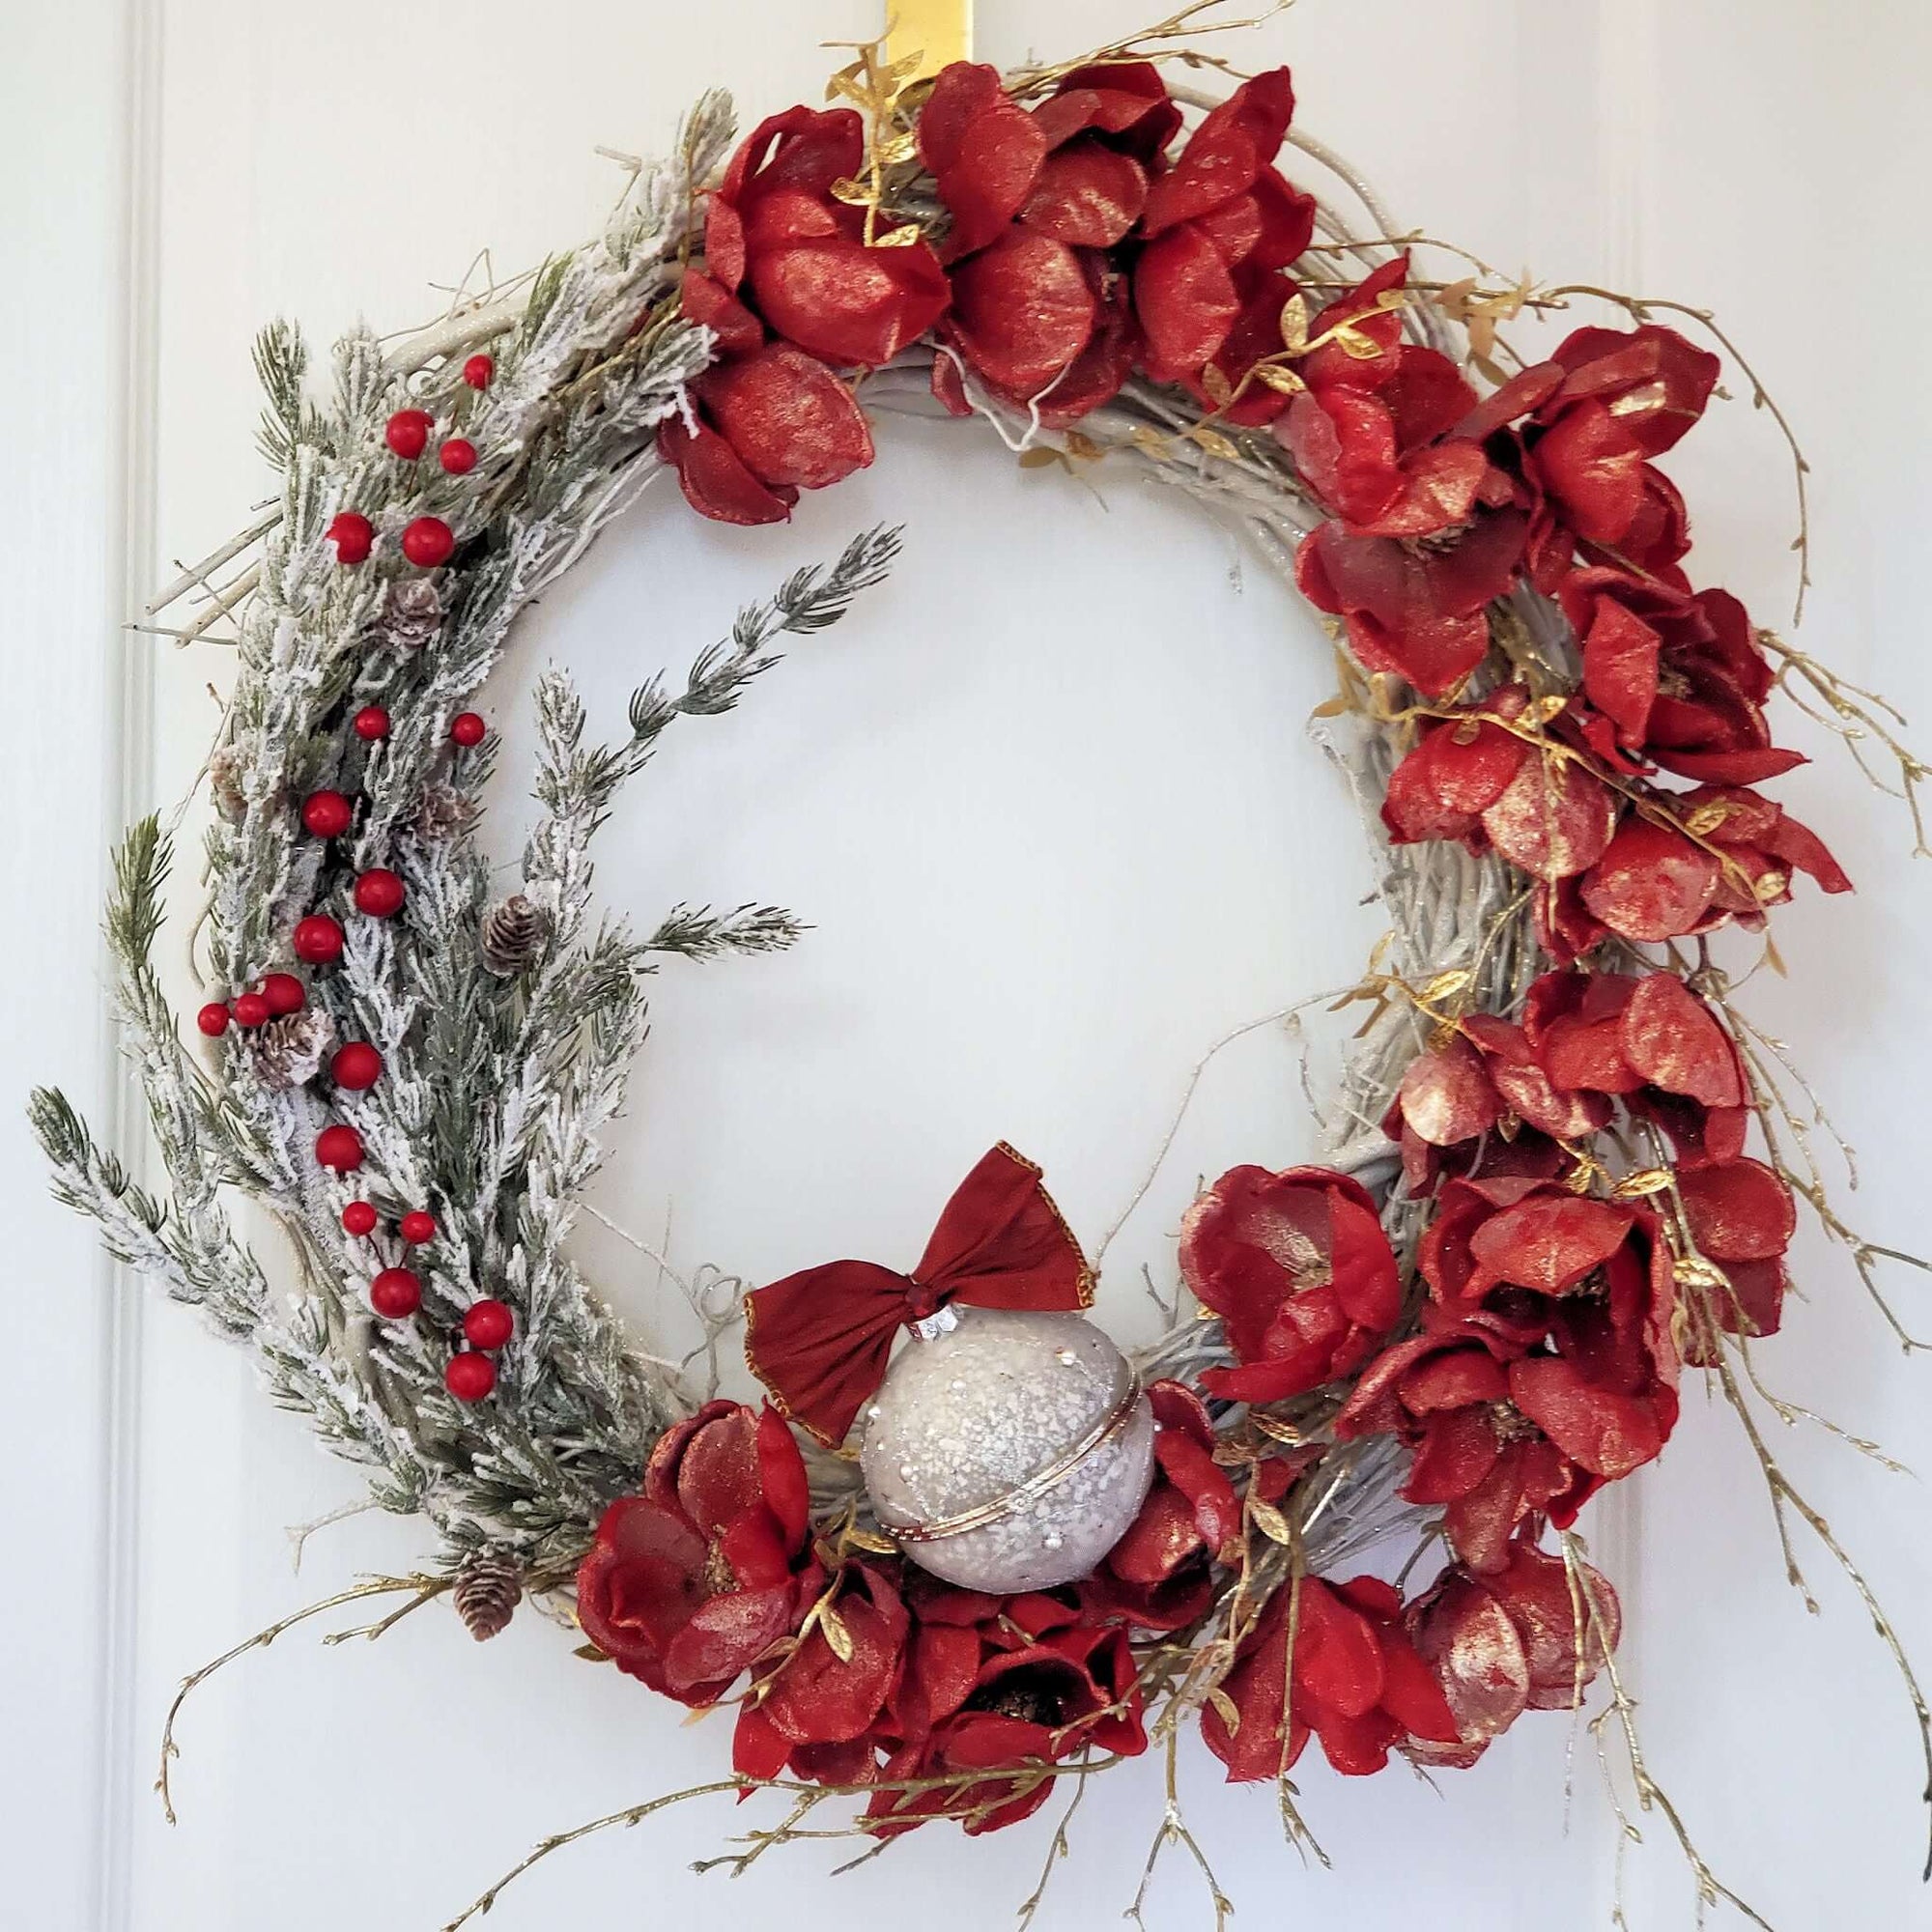 White Grapevine Wreath decorated with red, gold bushed magnolia flowers and a snow dusted pine bough with tiny pine cones and bright red berries.